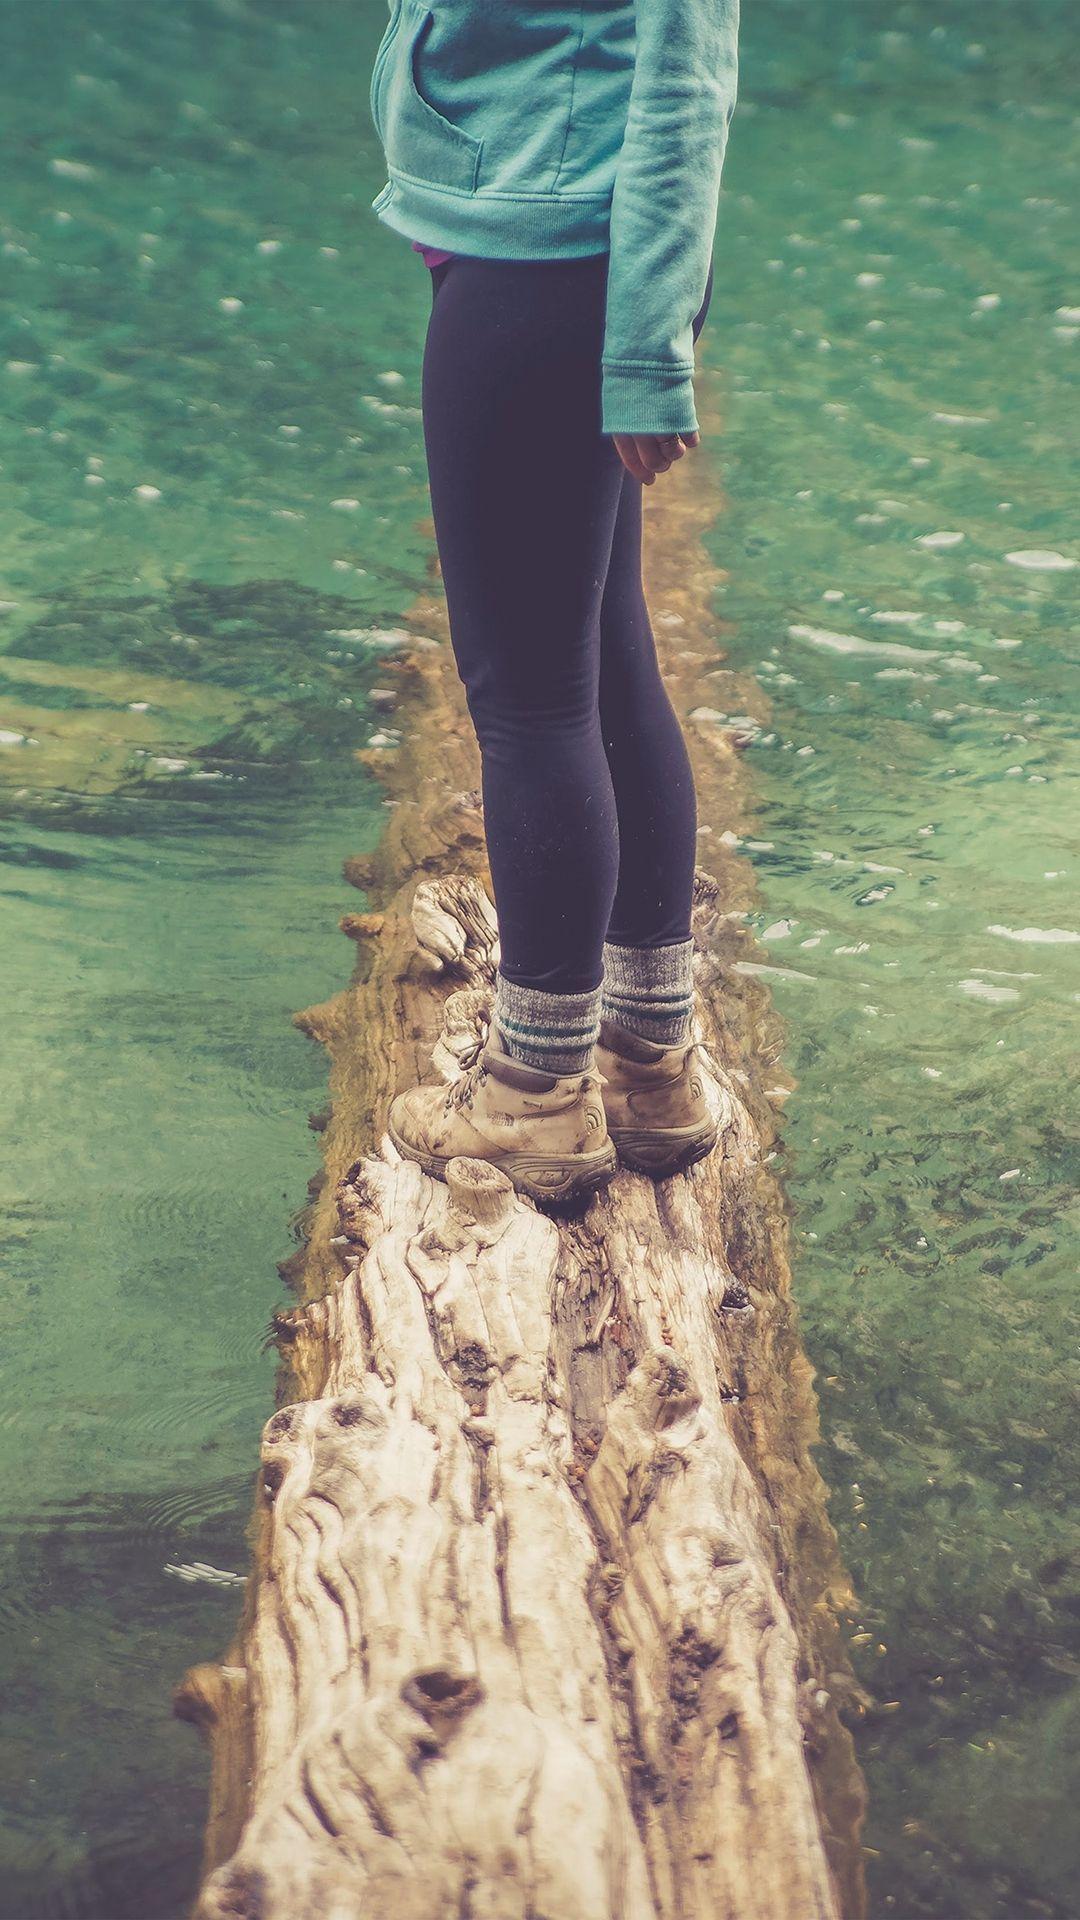 Girlfriend Lake Green Nature Water Cold #iPhone #plus